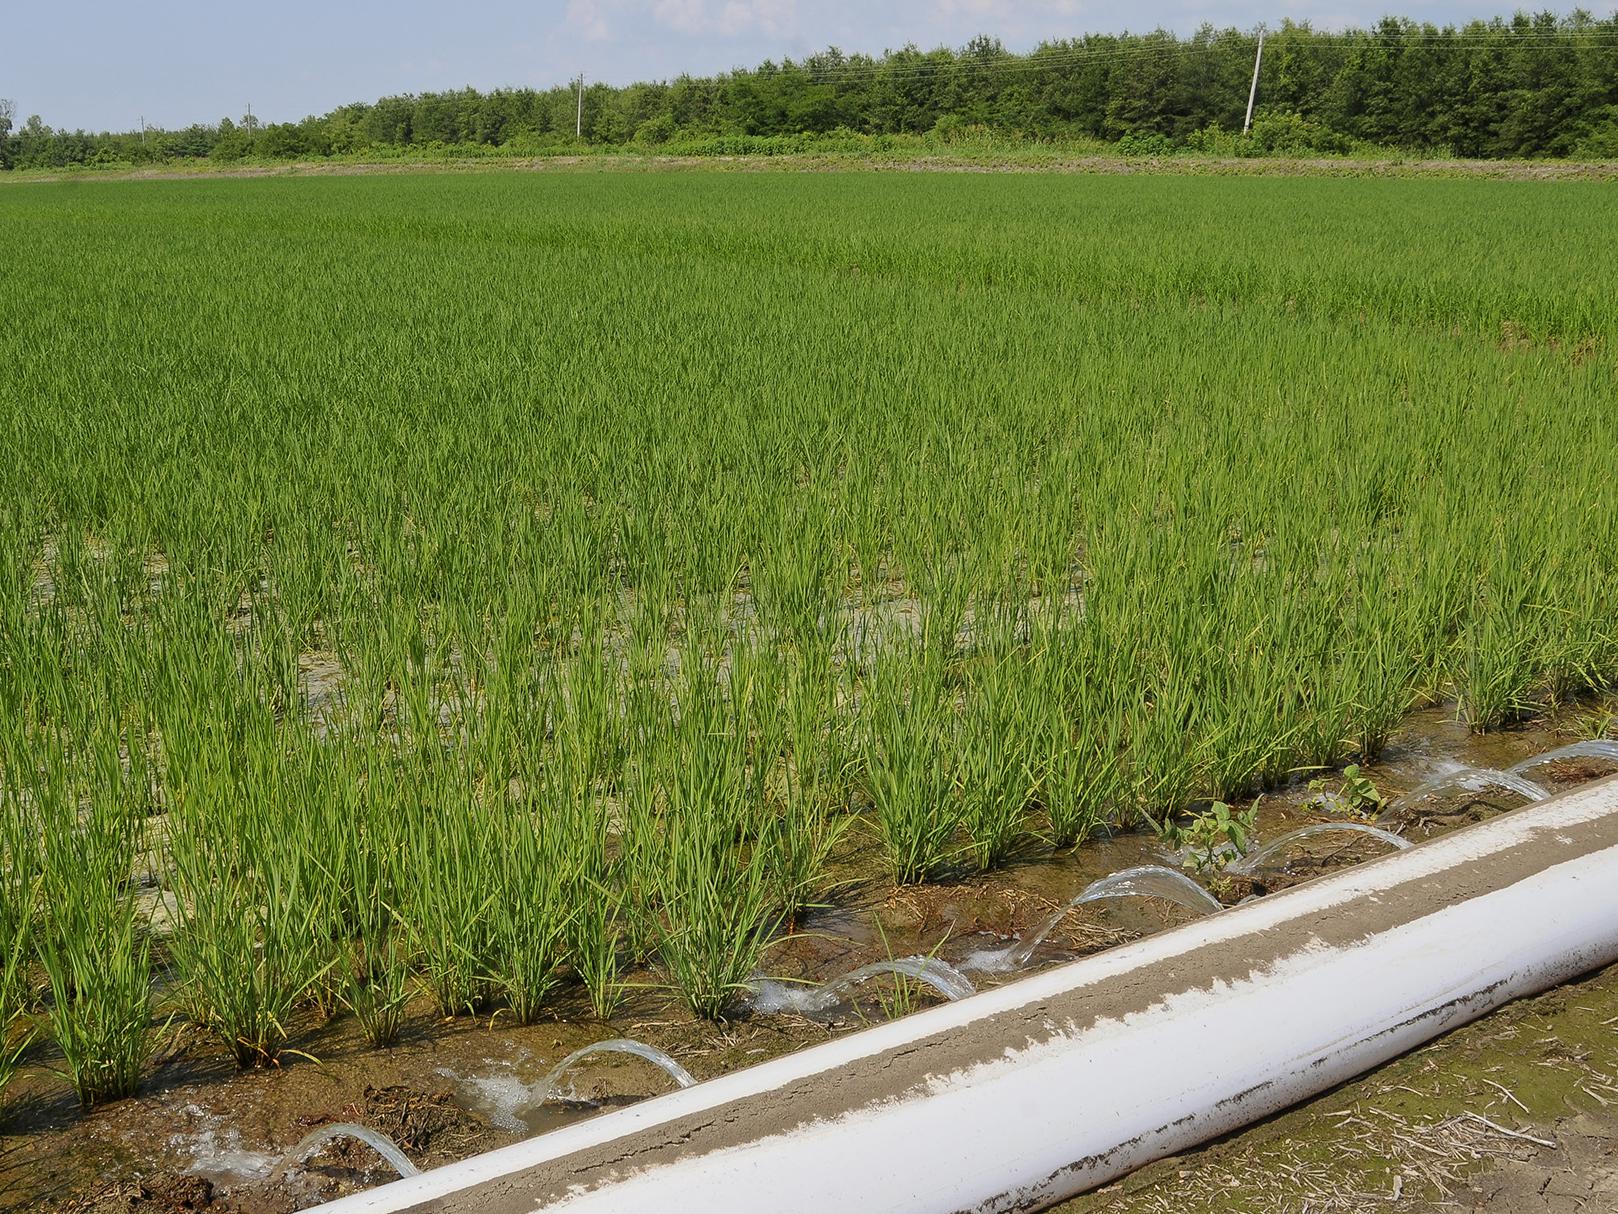 Computerized hole selection provides furrow irrigation of rice with water from a tailwater recovery system in the Mississippi Delta. (MSU Extension Service file photo)